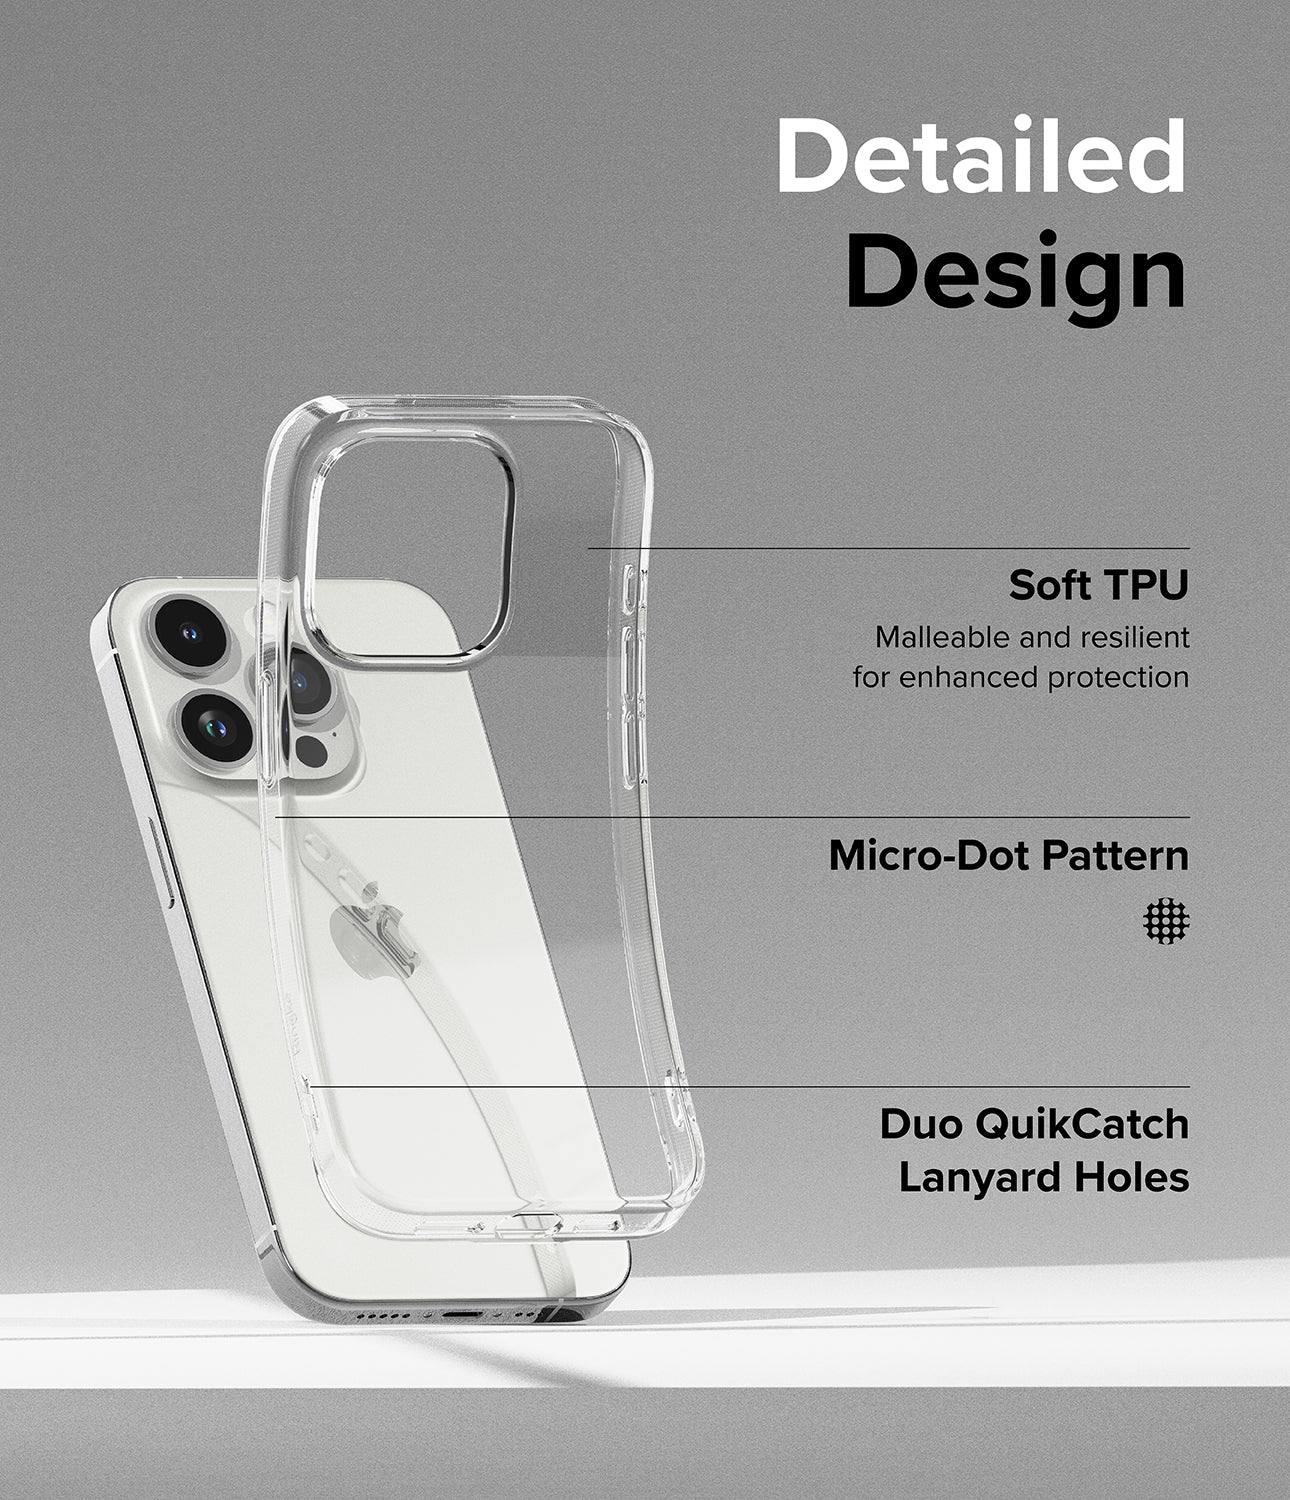 iPhone 15 Pro Case | Air - Clear - Detailed Design. Malleable and resilient for enhanced protection with Soft TPU. Micro-Dot Pattern. Duo QuikCatch Lanyard Holes.